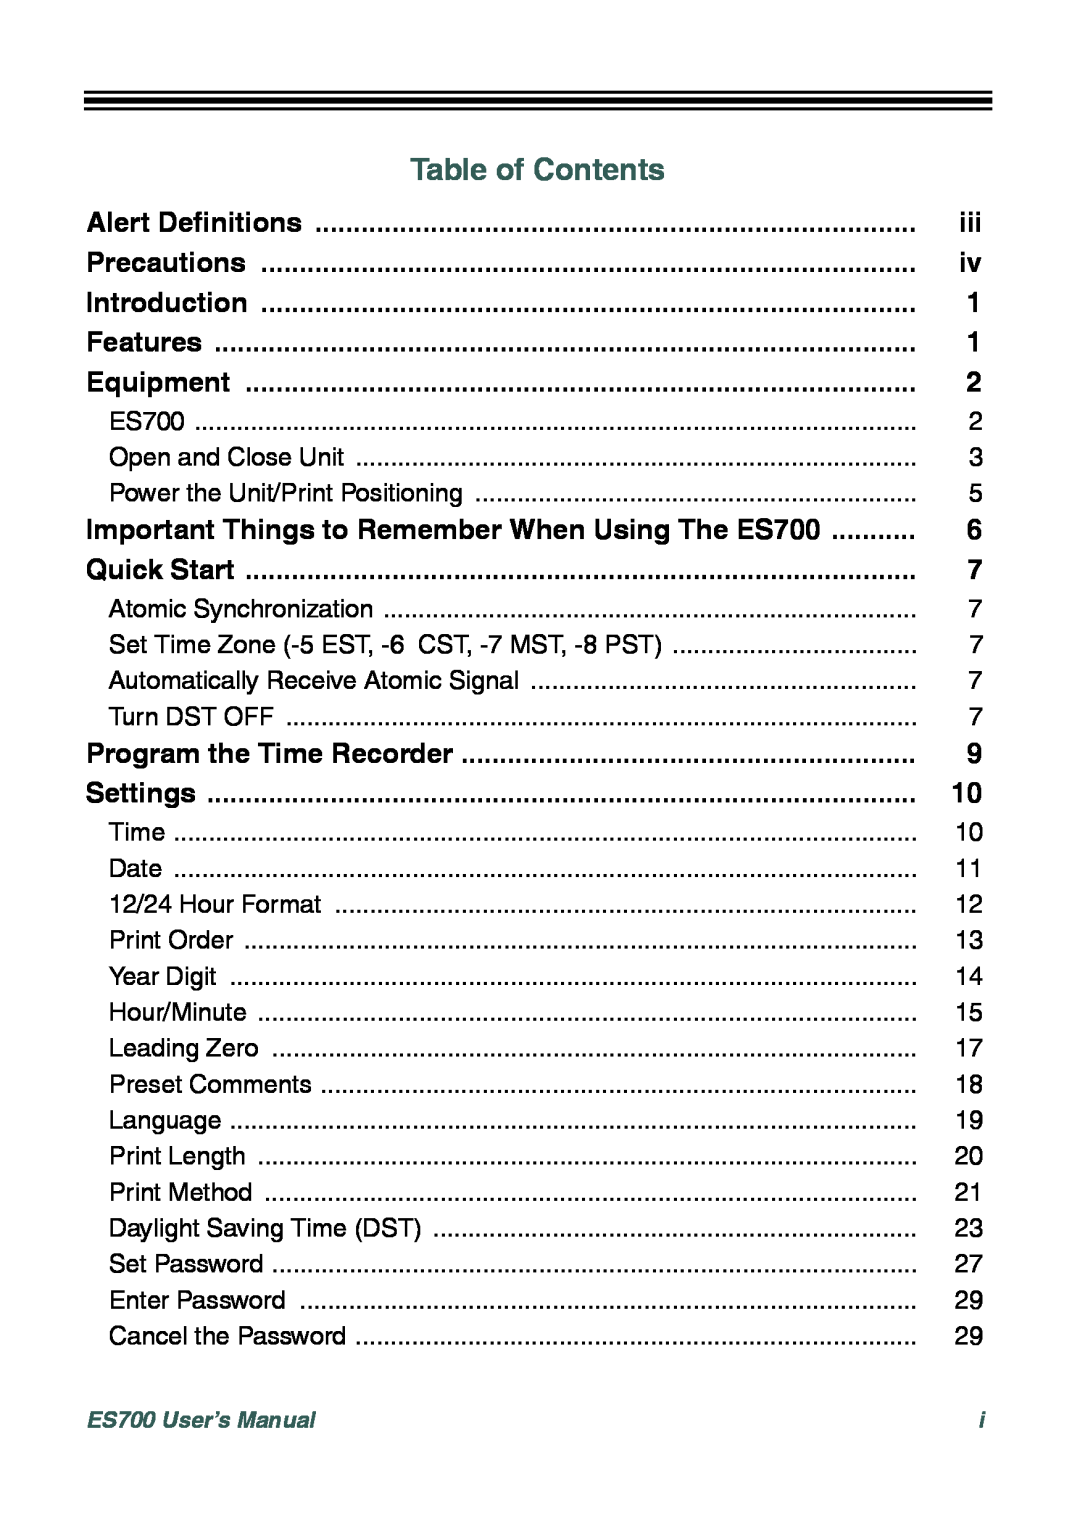 Acroprint ES700 user manual Table of Contents 